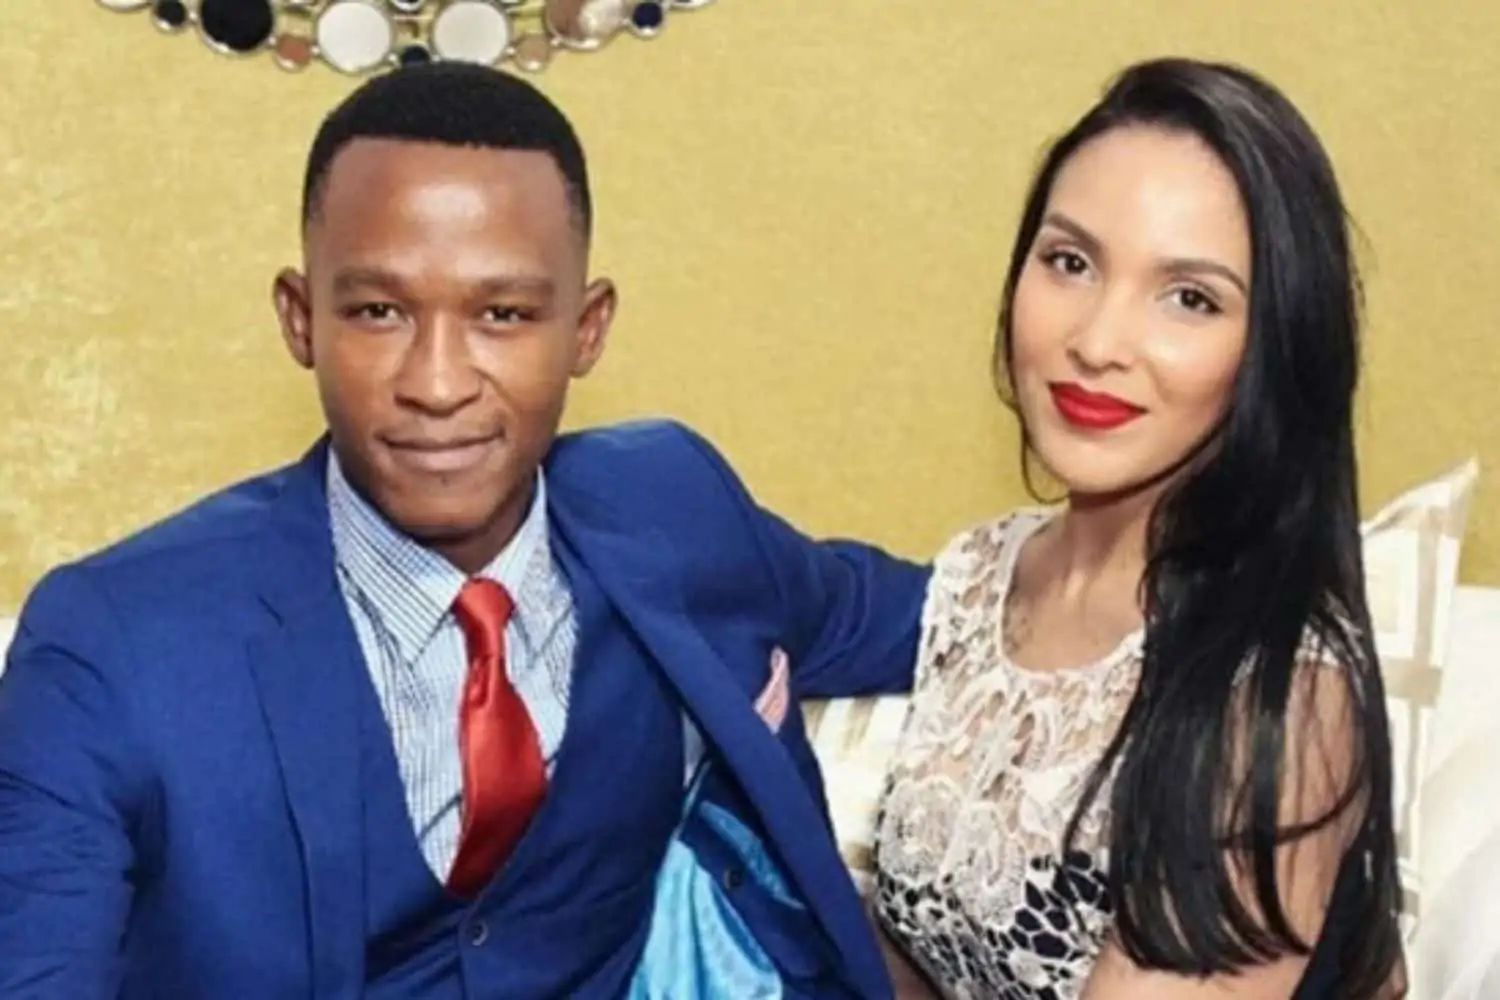 Monique Muller reacts after court rules in favour of Katlego Maboe